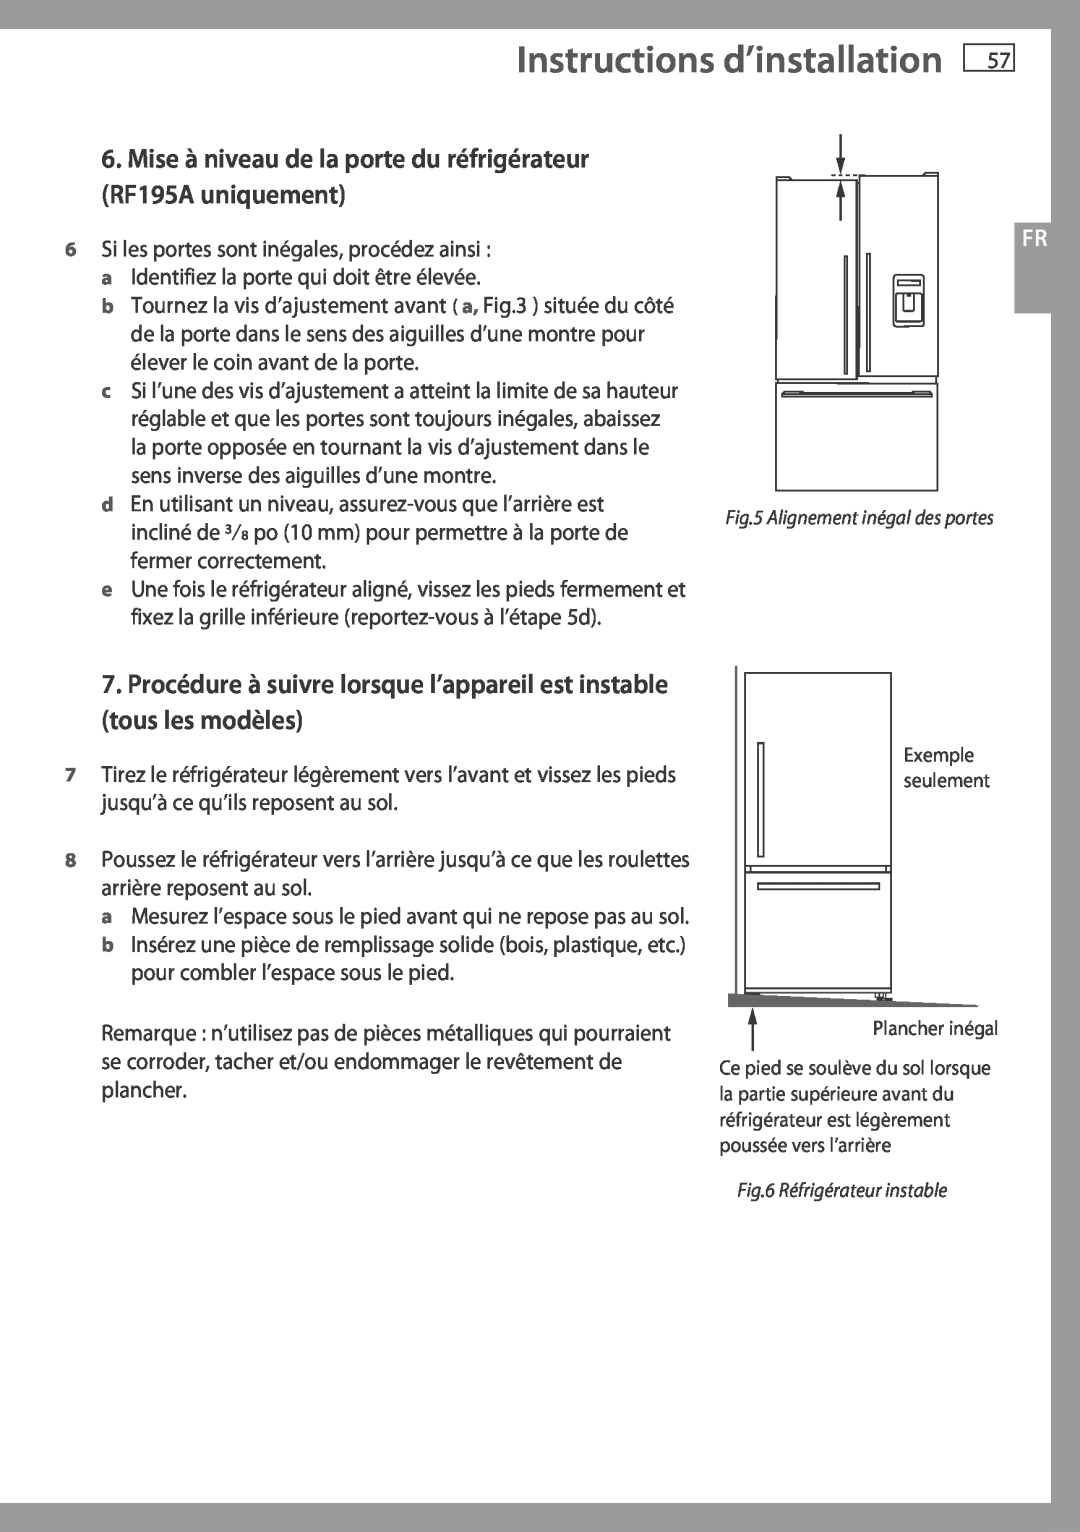 Fisher & Paykel RF195A, RF175W Instructions d’installation, Si les portes sont inégales, procédez ainsi 